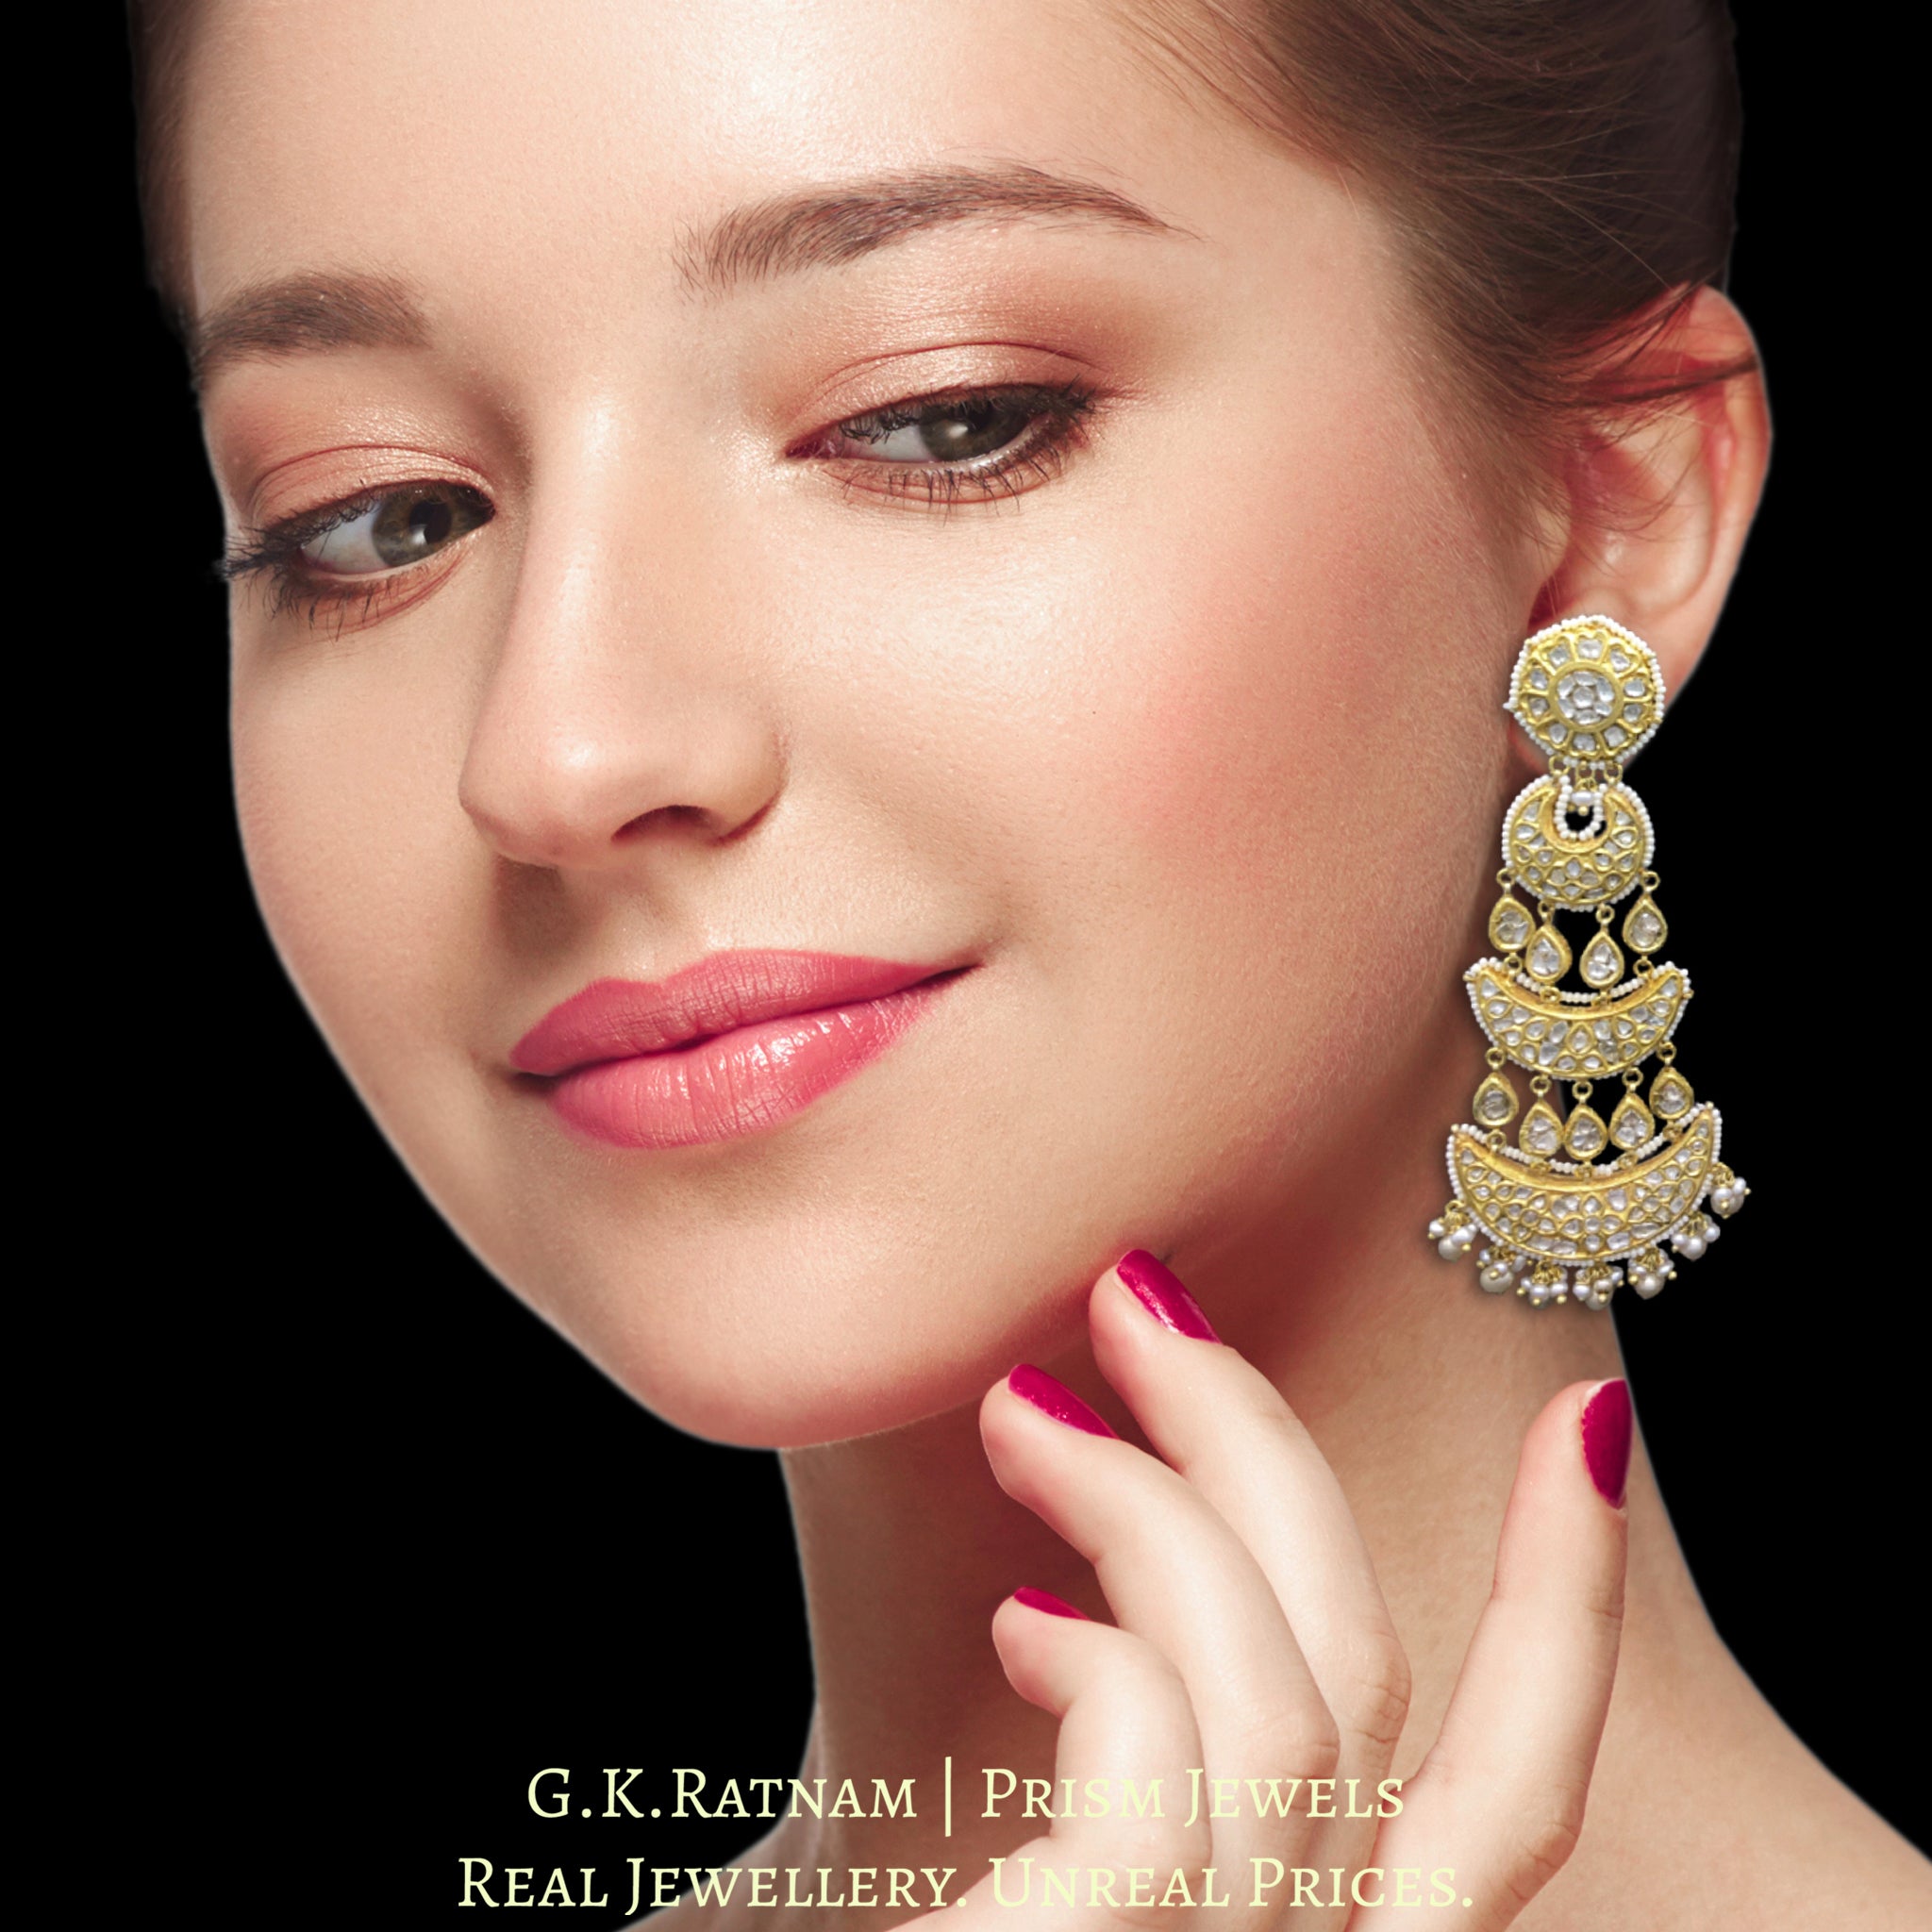 23k Gold and Diamond Polki Long Chandelier Earring Pair with antiqued hyderabadi pearls